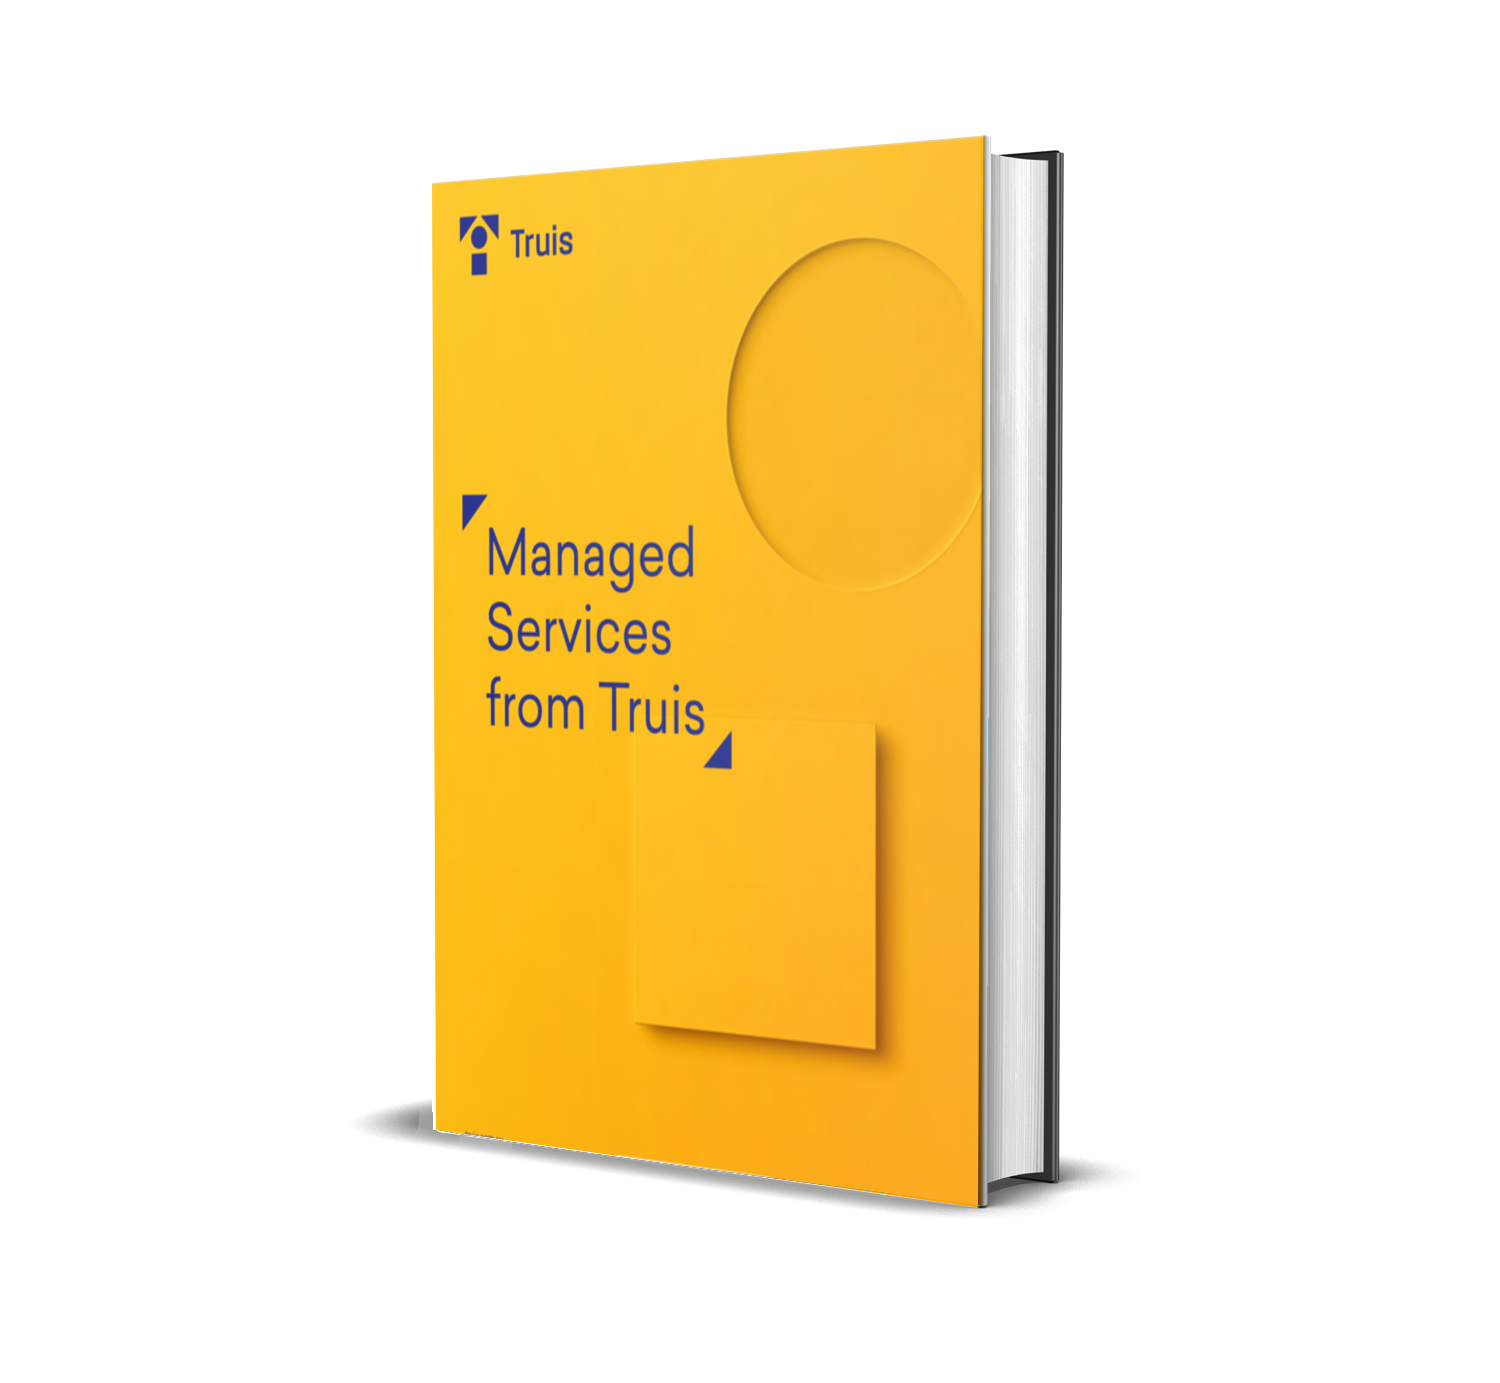 What are our IT Managed Services and how can we help?